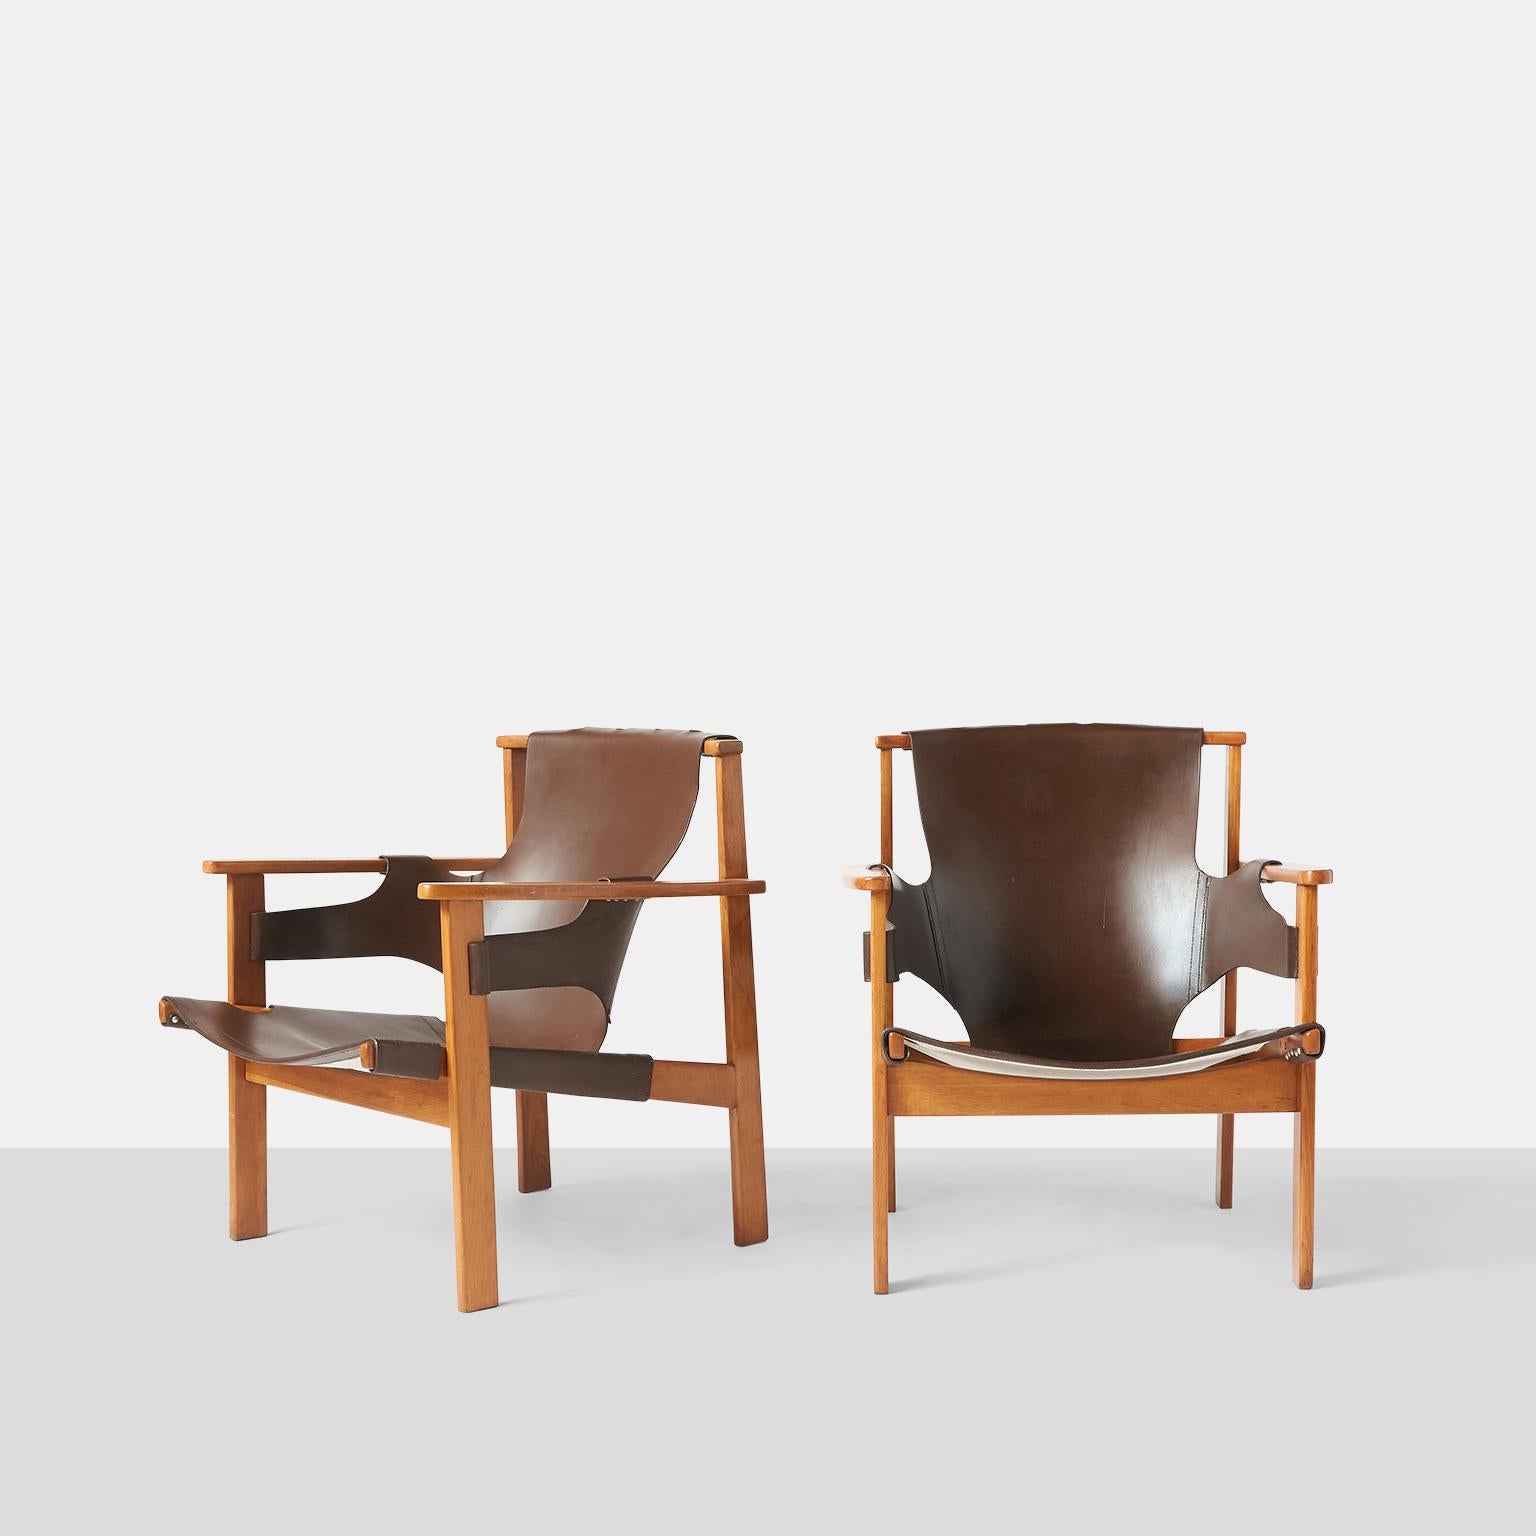 Pair of “Trienna” armchairs by Carl-Axel Acking
A pair of armchairs in leather with oak frames for Nordiska Kompanient designed in 1957 and model #563-059.
Sweden, circa 1950s.